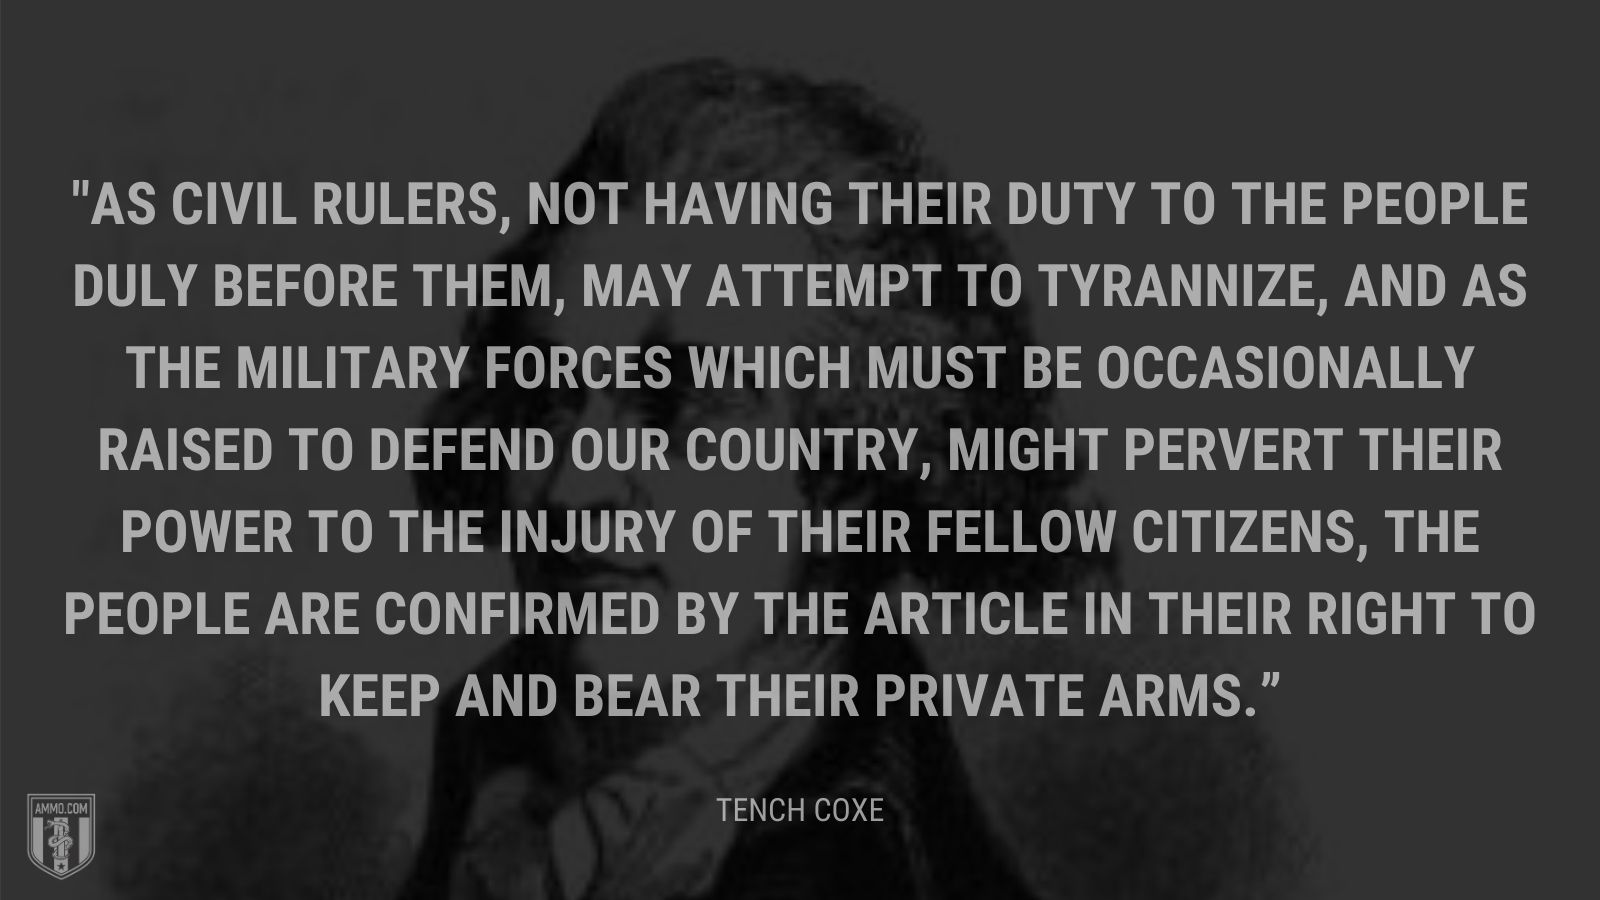 “As civil rulers, not having their duty to the people duly before them, may attempt to tyrannize, and as the military forces which must be occasionally raised to defend our country, might pervert their power to the injury of their fellow citizens, the people are confirmed by the article in their right to keep and bear their private arms.” - Tench Coxe